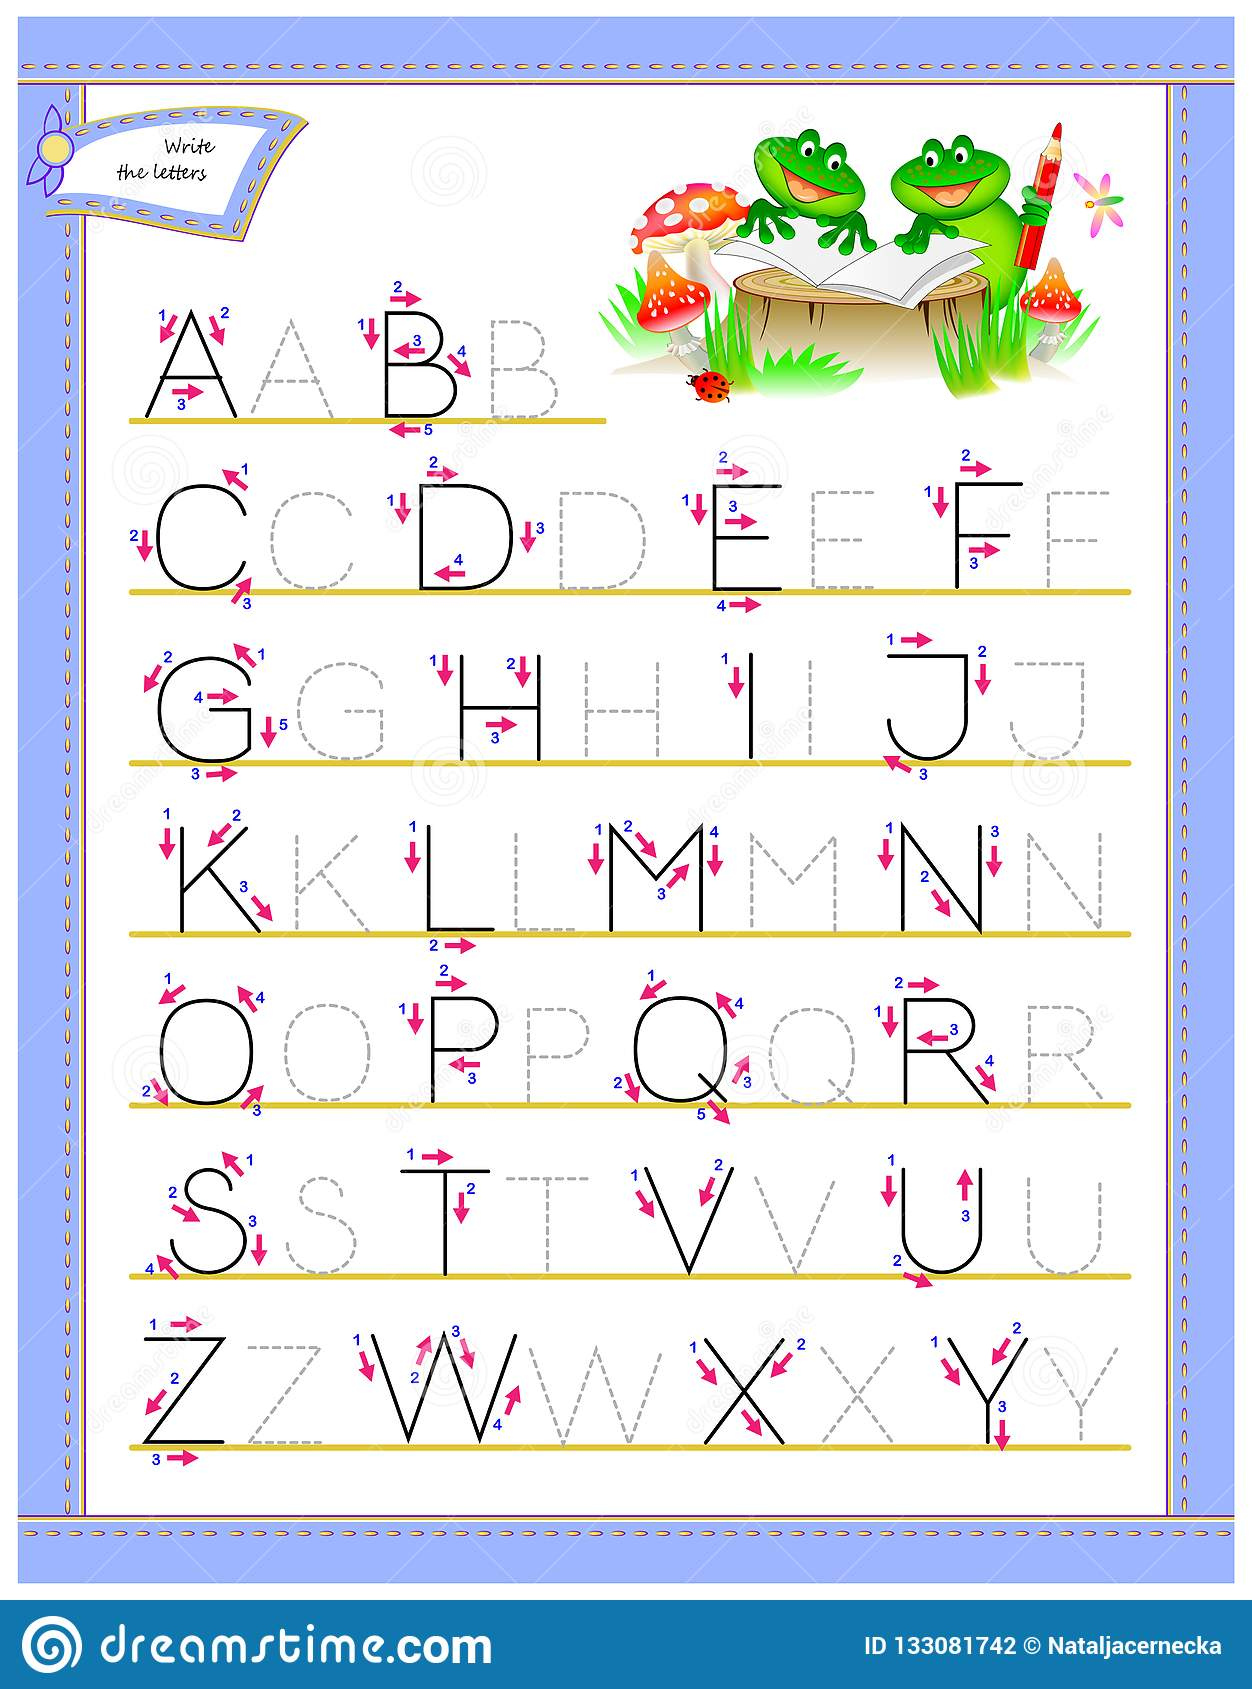 Tracing ABC Letters For Study English Alphabet Worksheet For Kids 